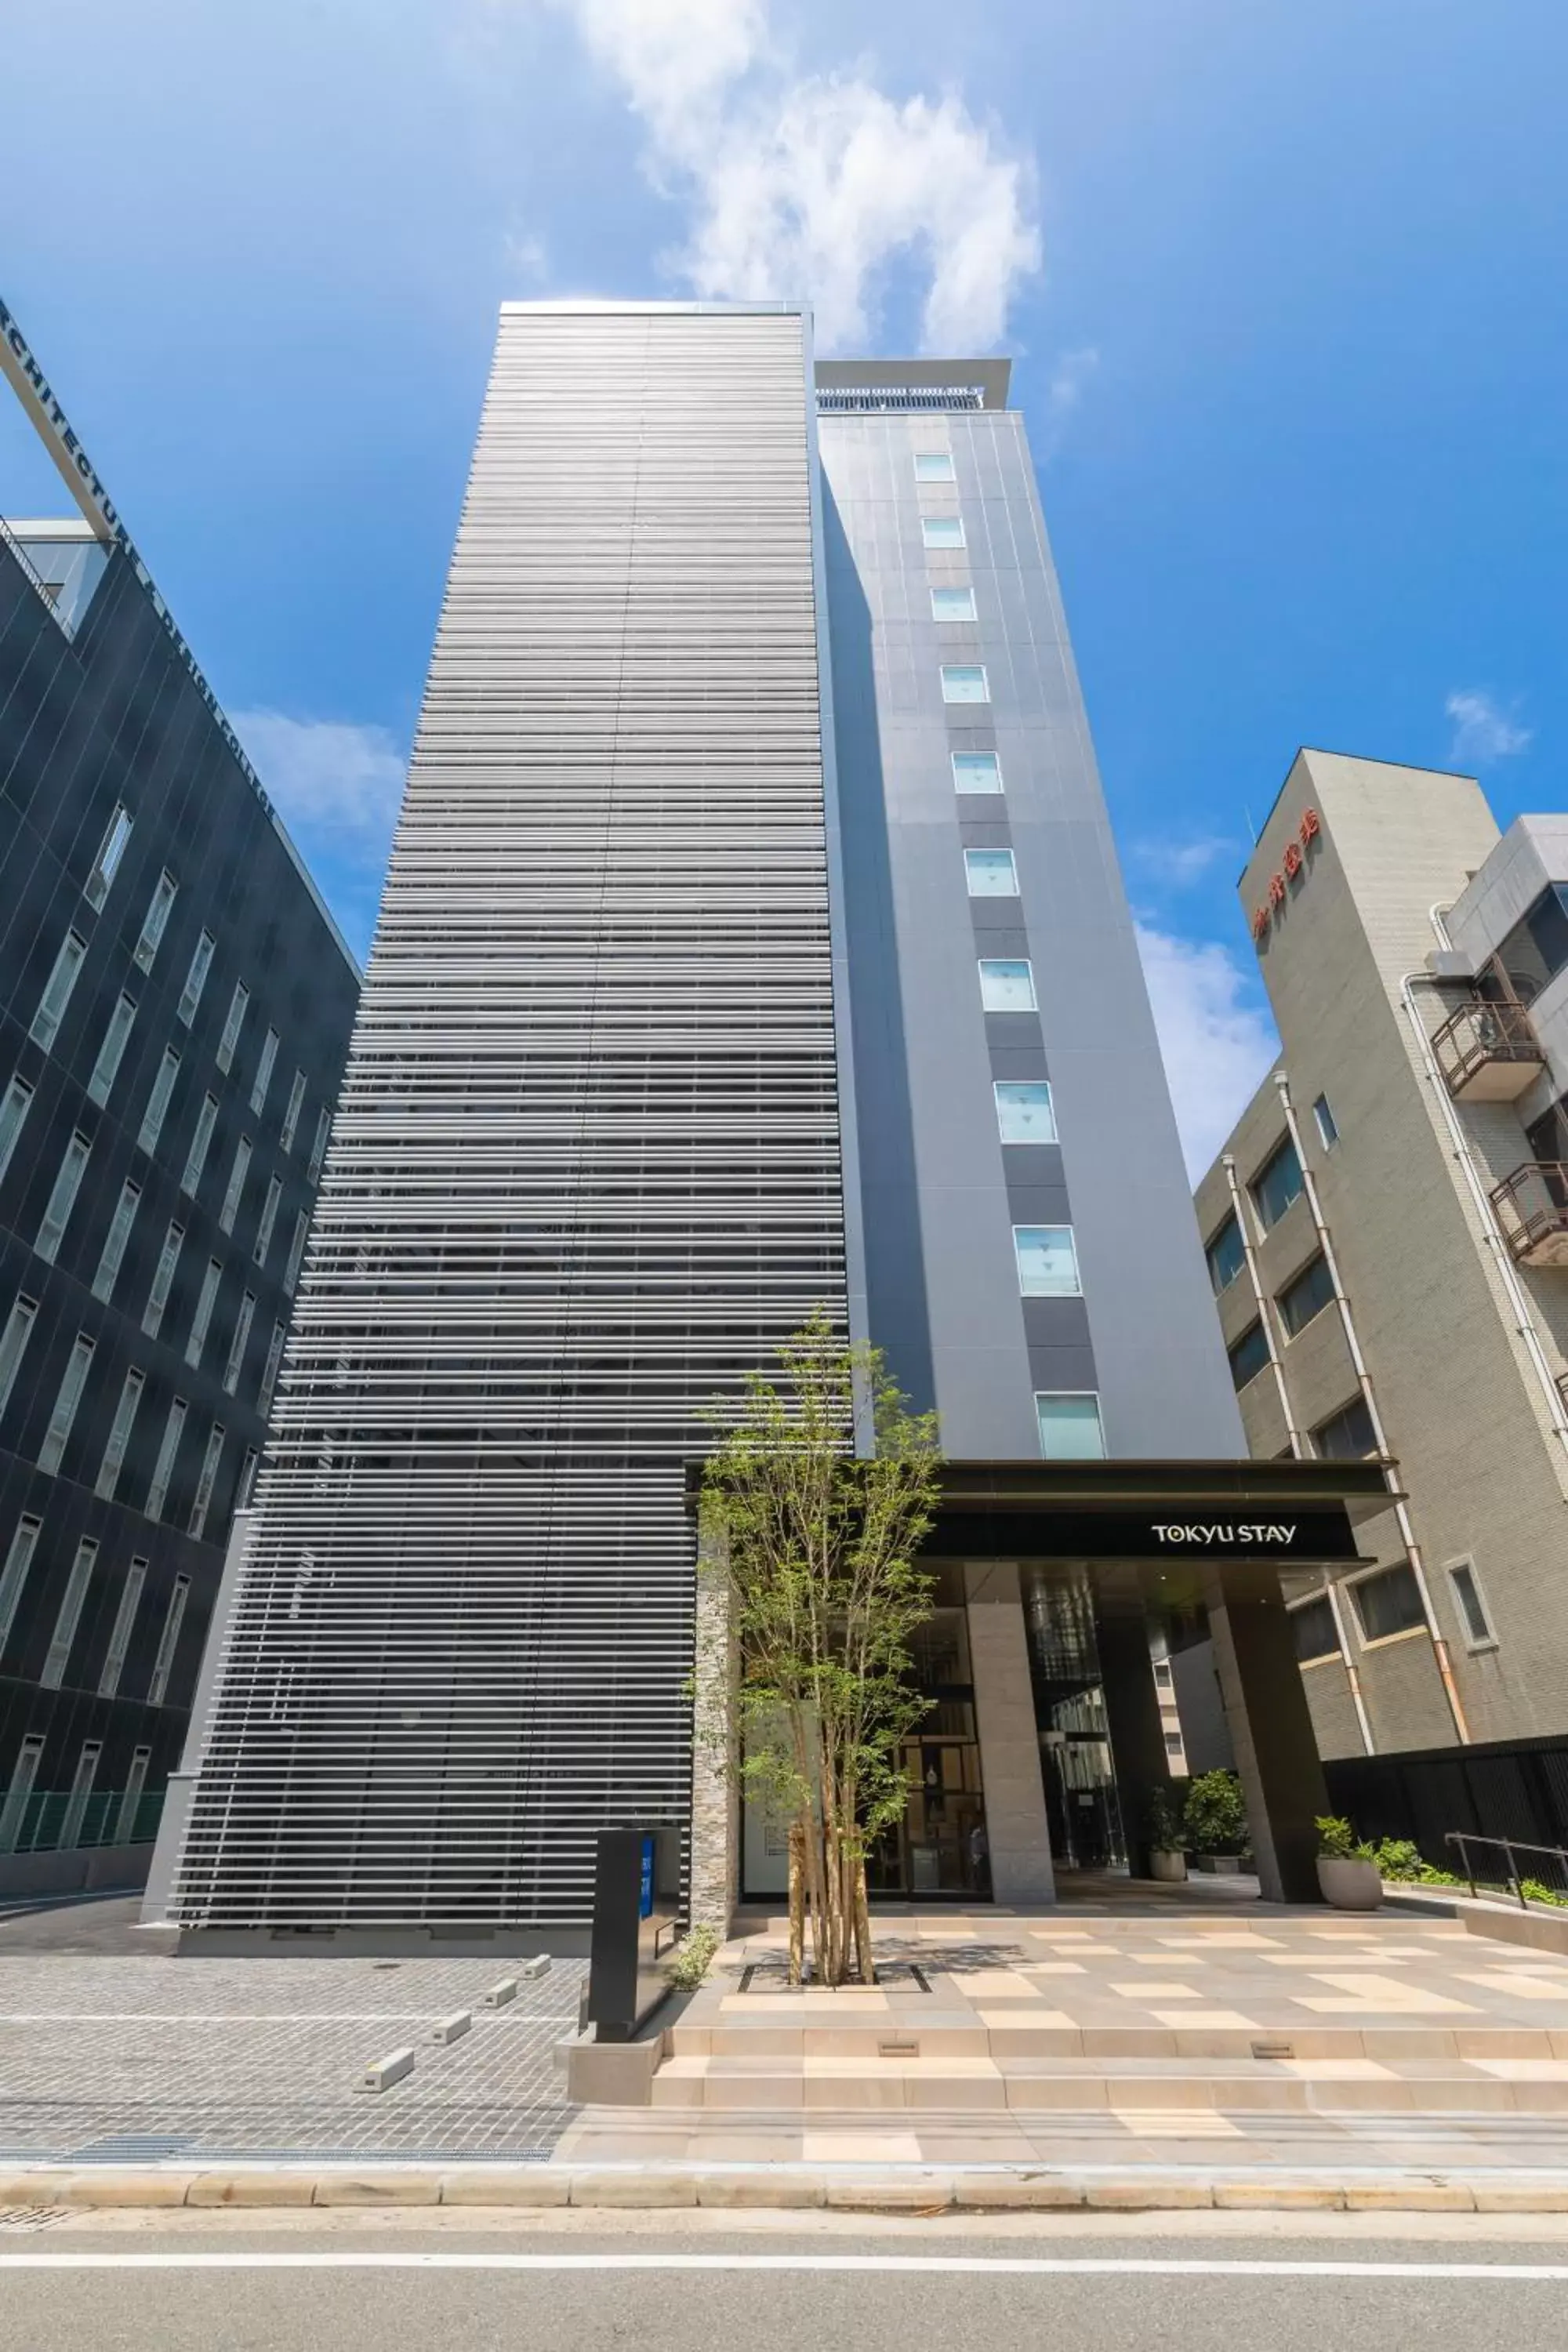 Property Building in Tokyu Stay Hakata